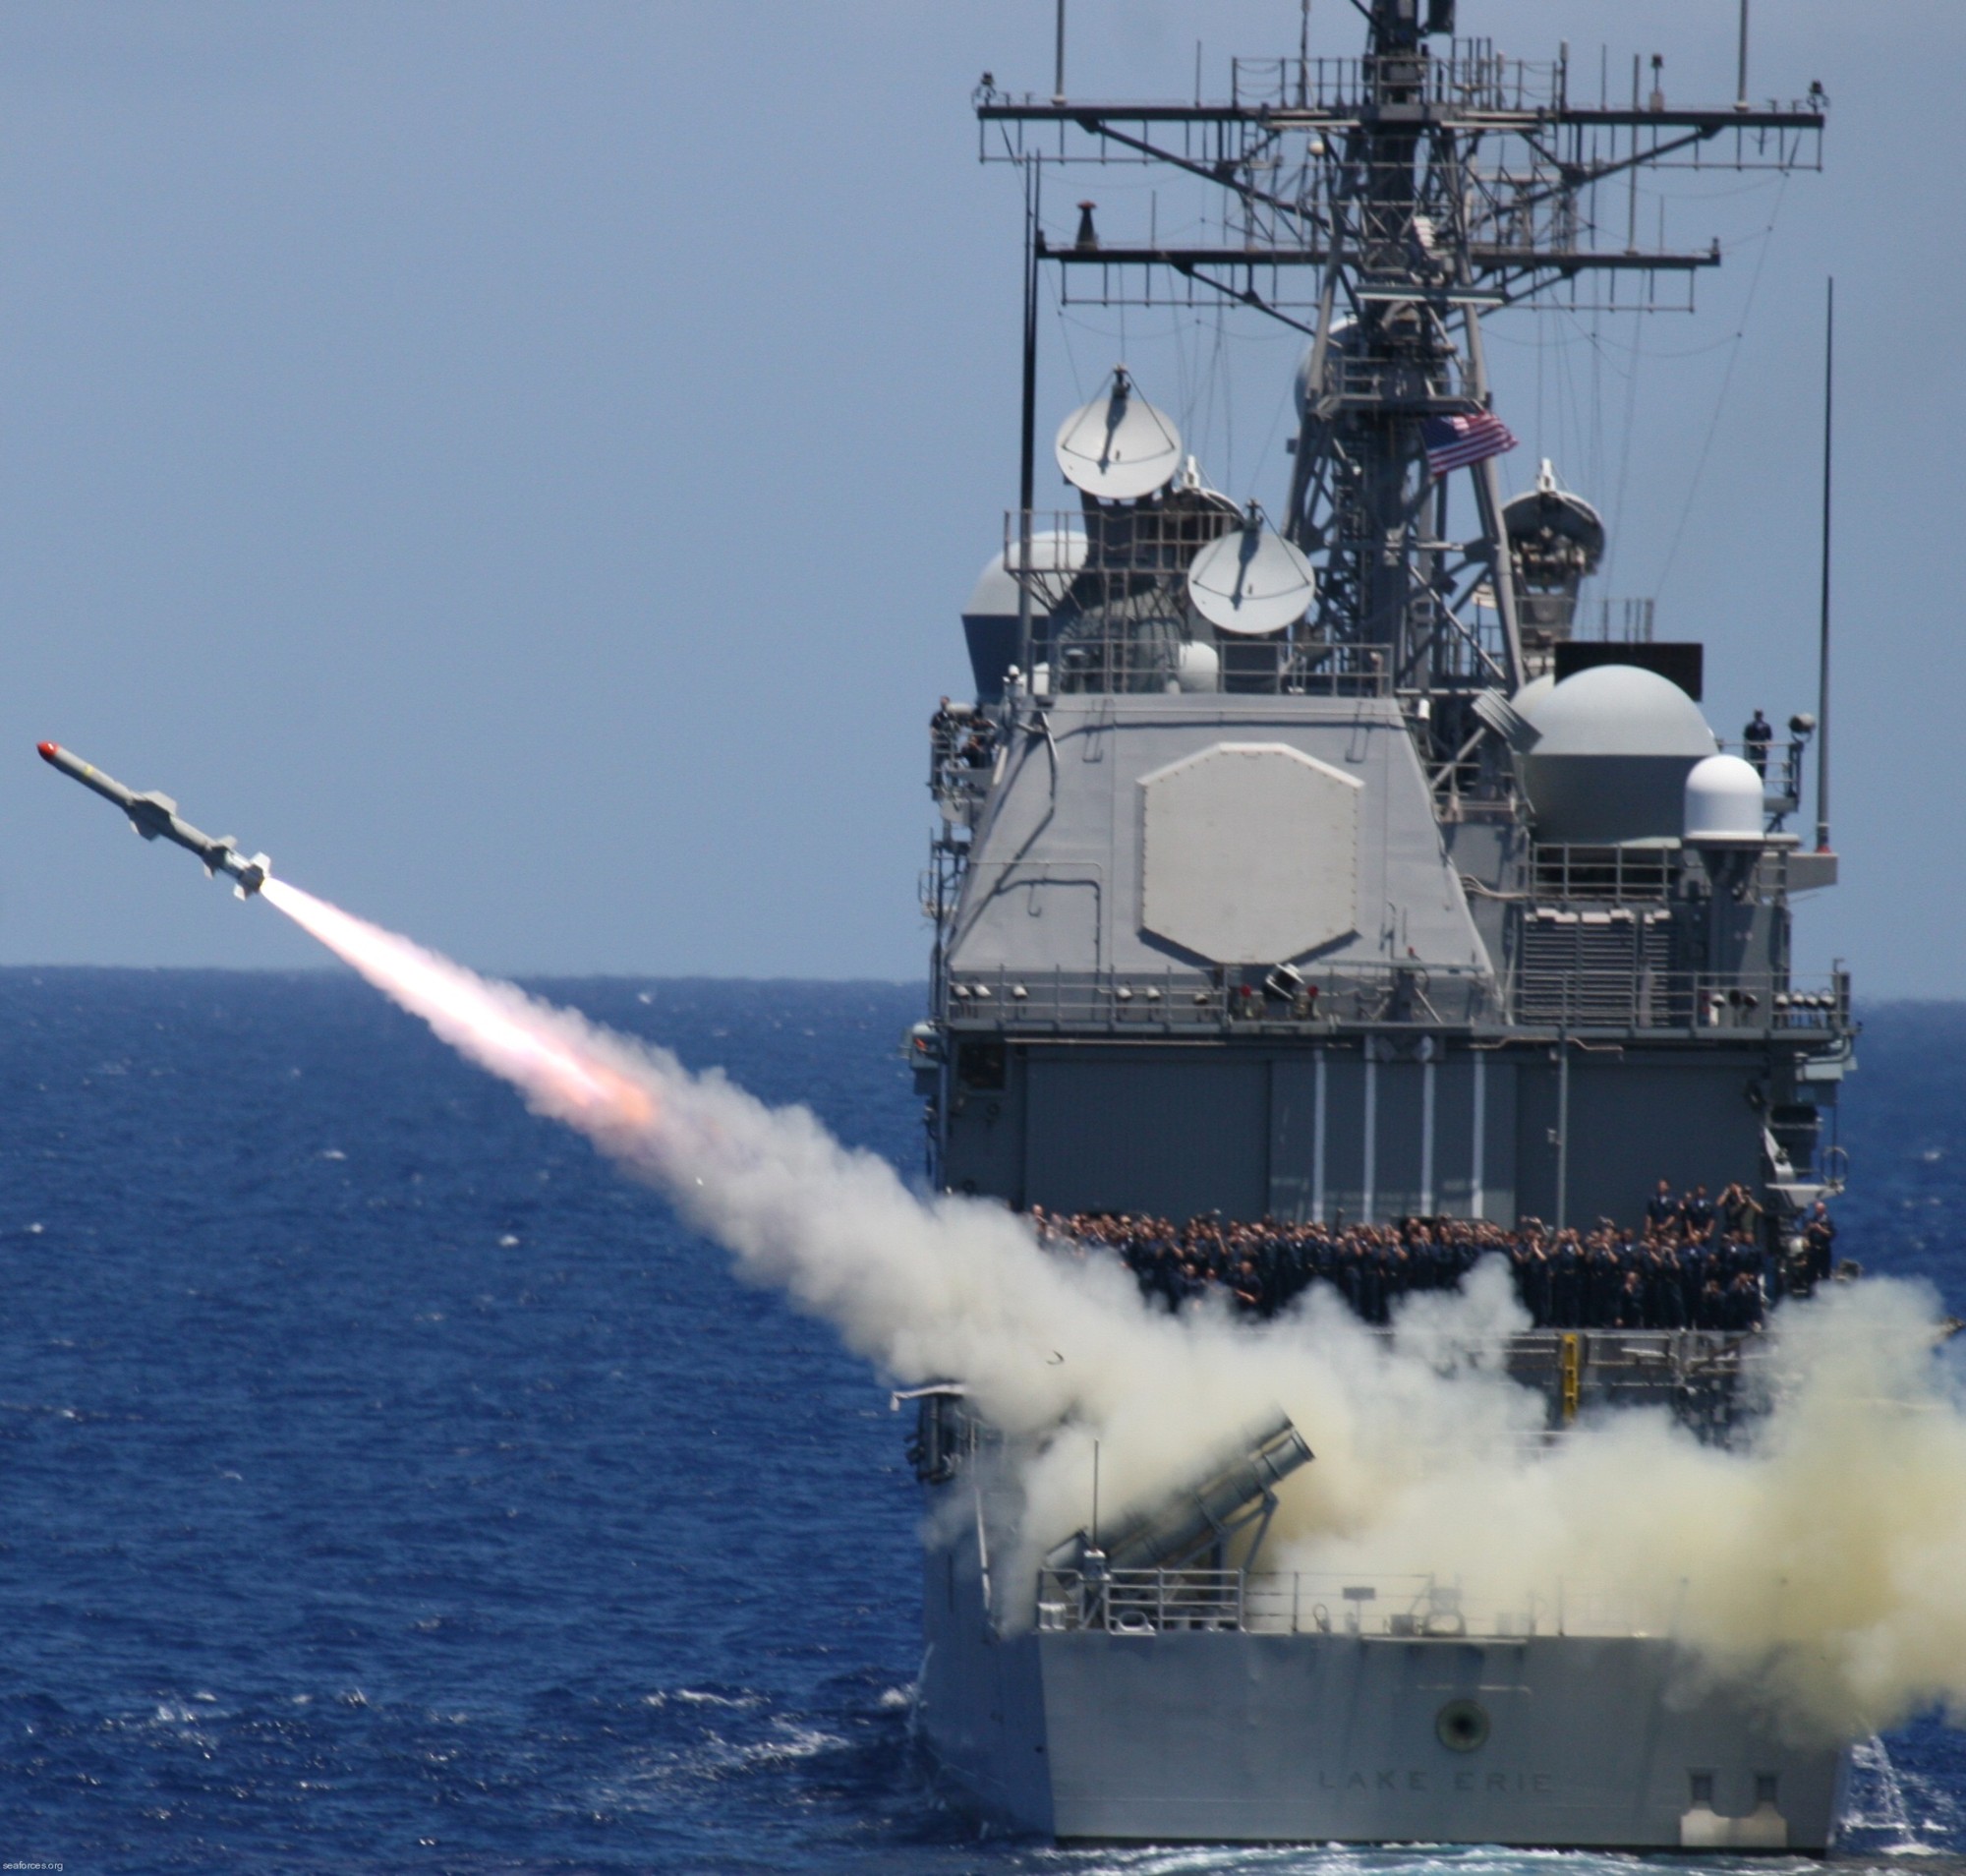 cg-70 uss lake erie ticonderoga class guided missile cruiser navy 44 rgm-84 harpoon ssm missile launch